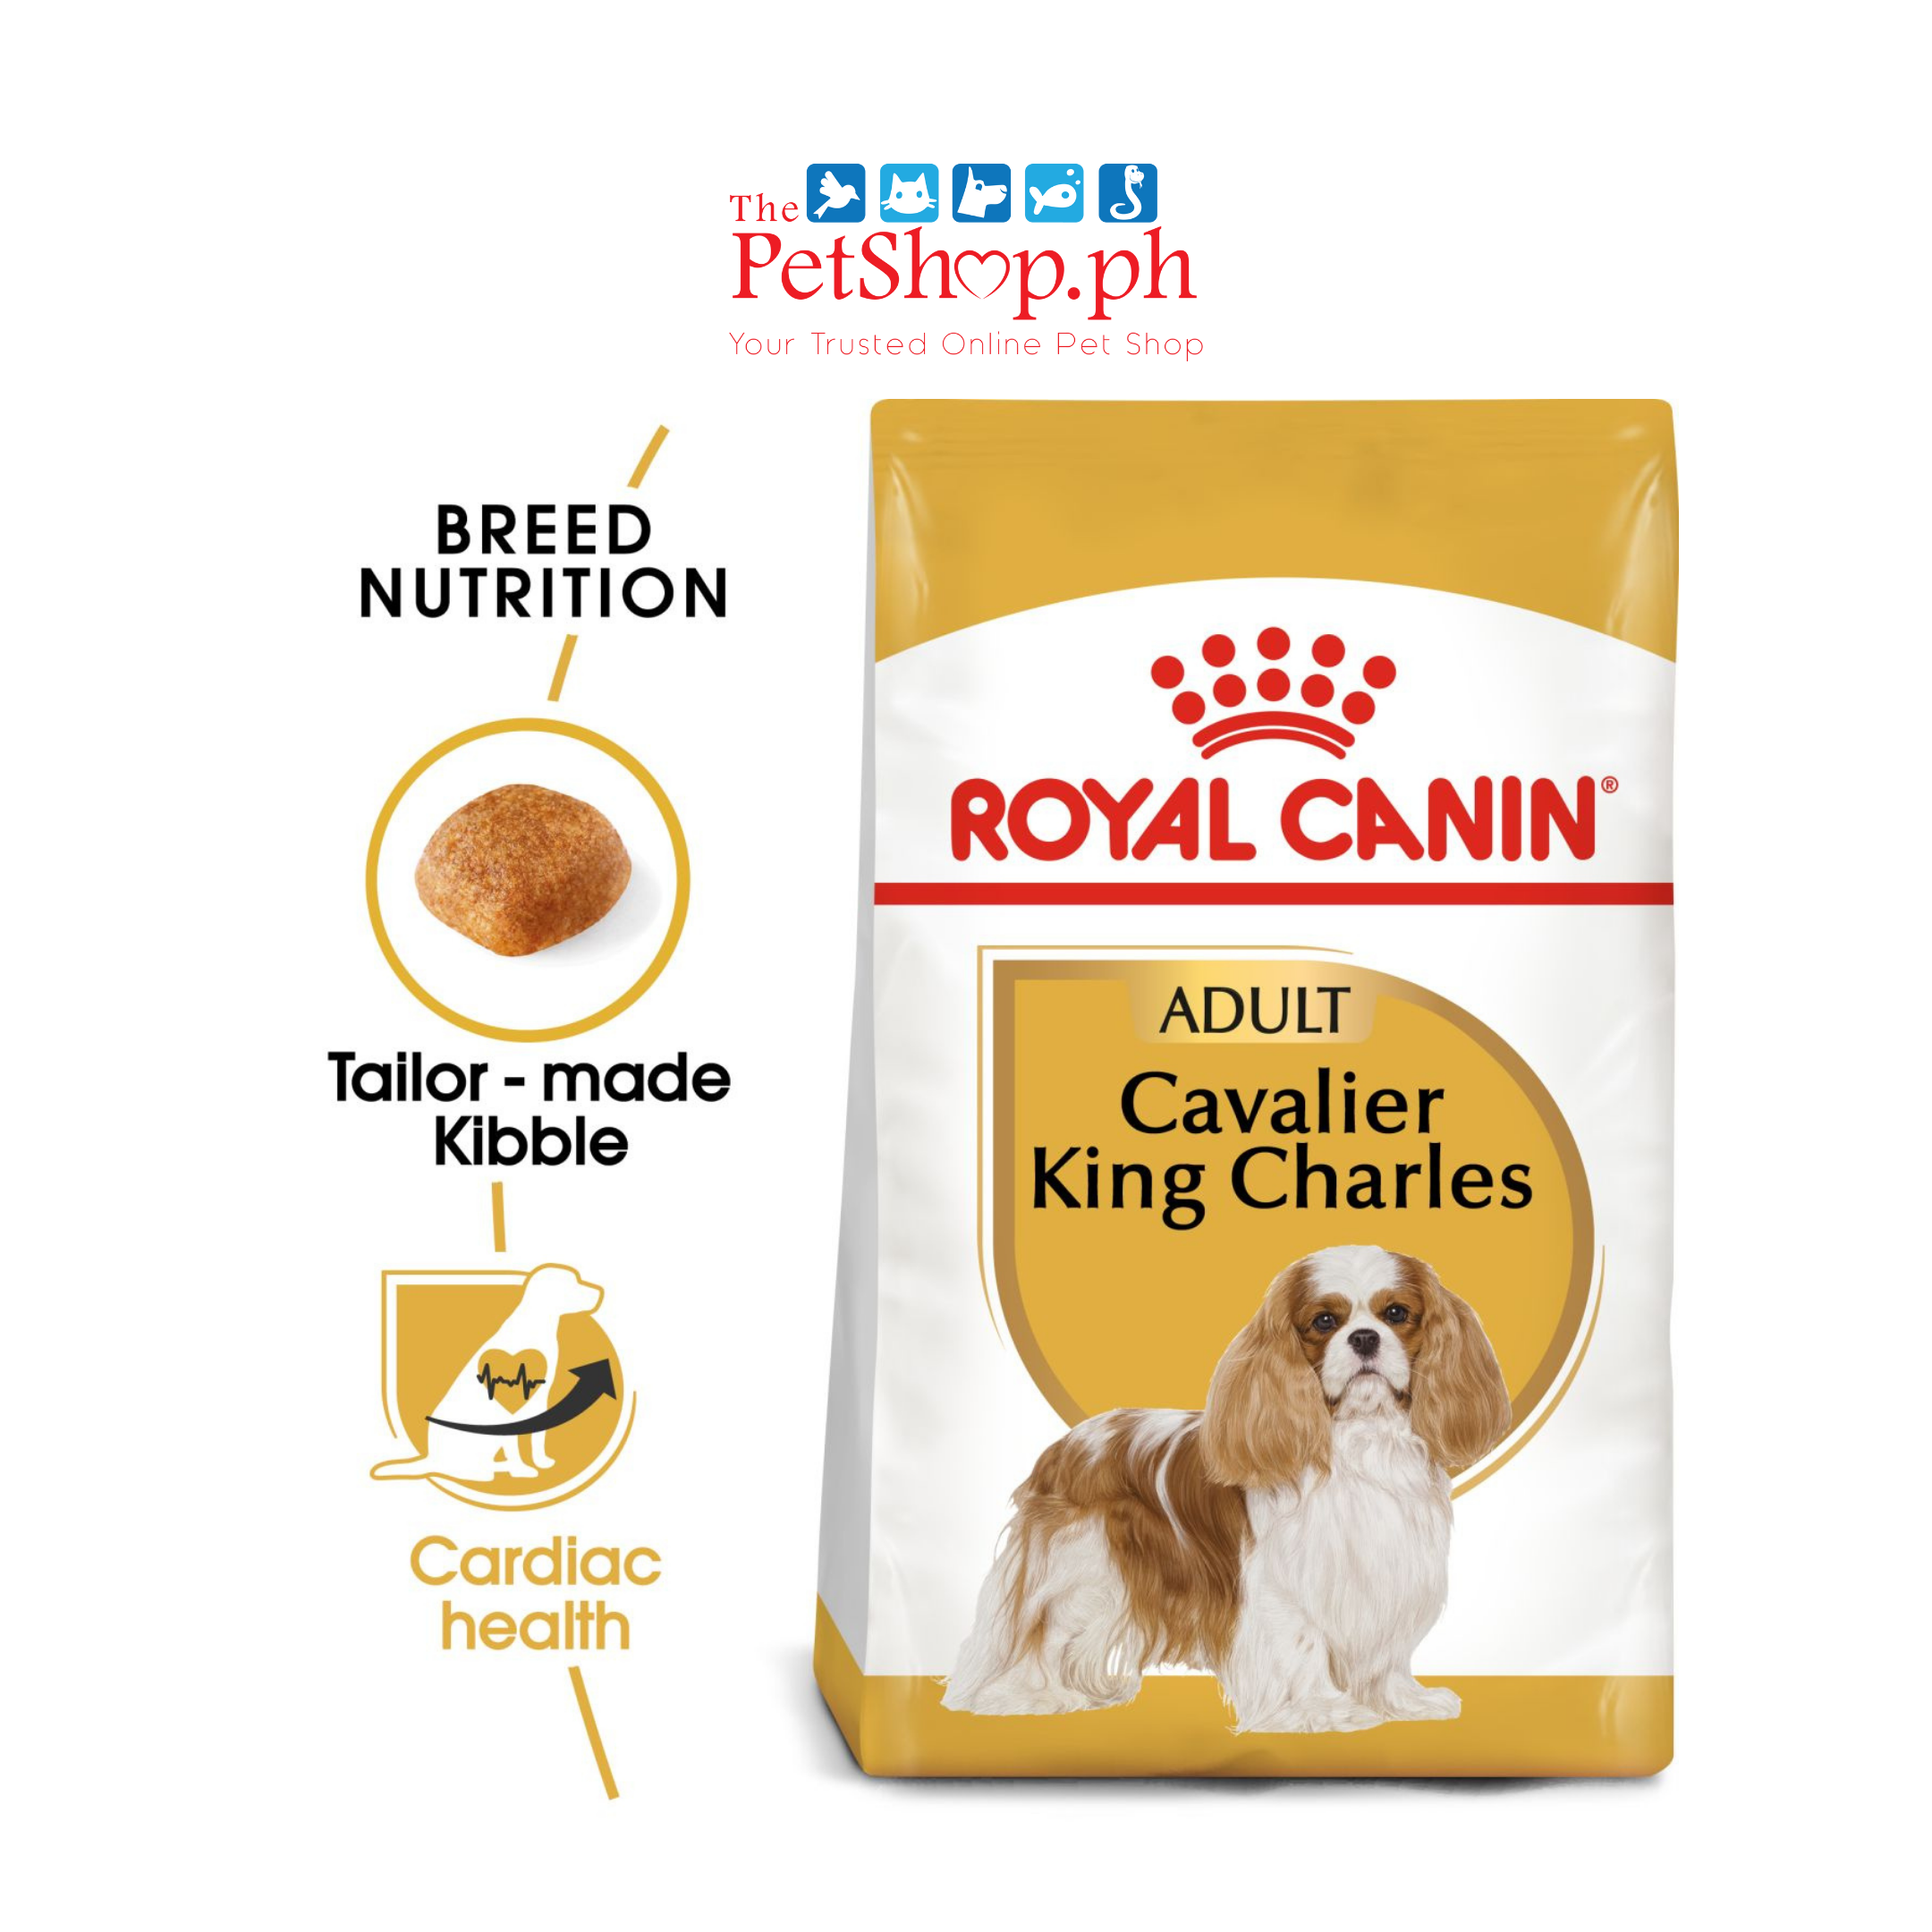 Royal Canin Cavalier King Charles Adult 1.5kg Dry Dog Food - Breed Health Nutrition